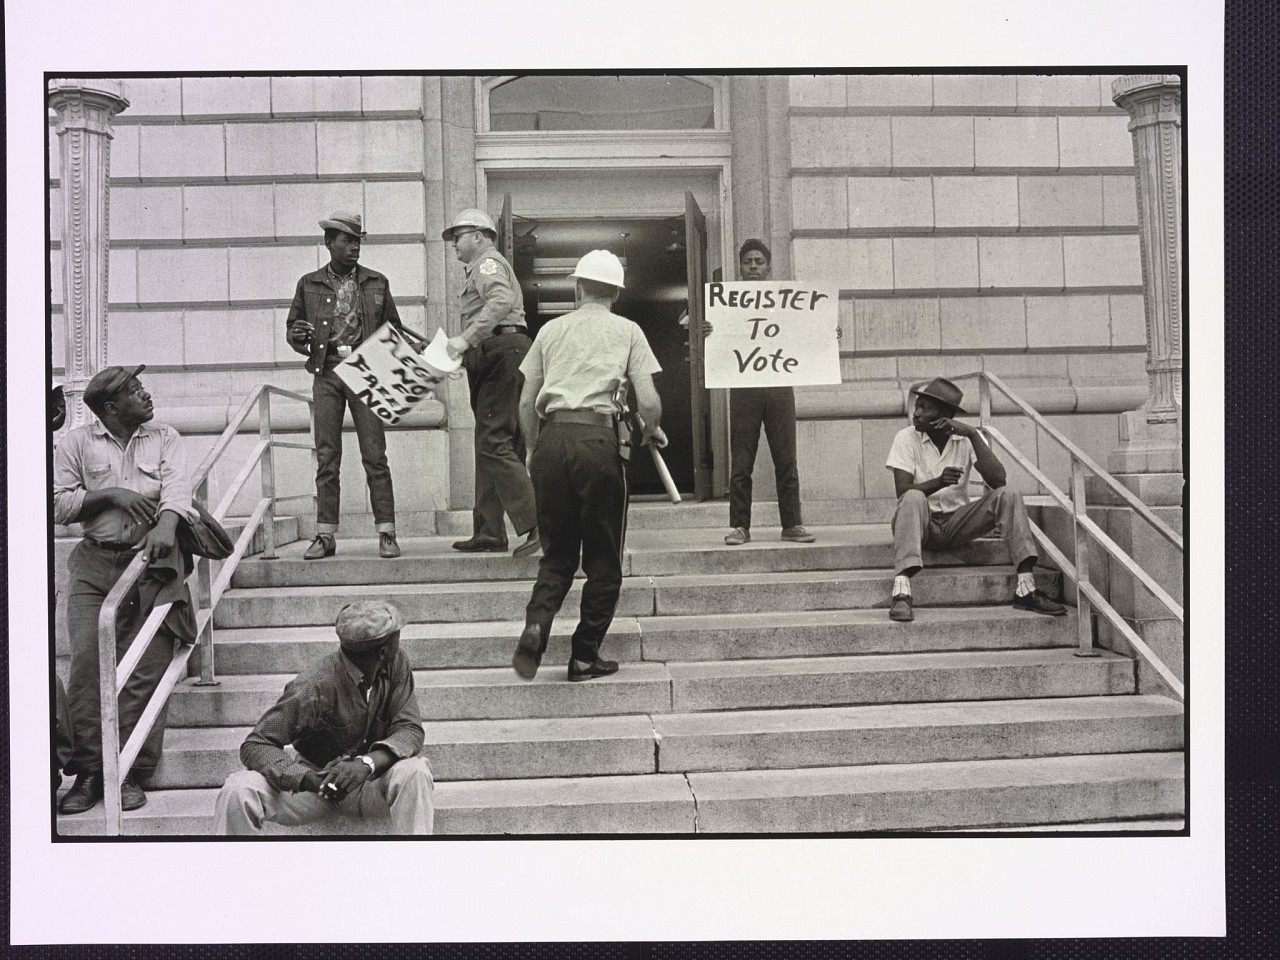 Danny LYON, Sheriff Jim Clark arrests two SNCC voter registration workers on the steps of the federal building, Selma, Alabama, 1963
Later gelatin silver print, 11 x 14 in.
2016.07.010
ADDITIONAL INFORMATION: Illustrated: Danny Lyon, The Seventh Dog (New York, The Phaidon Press, 2014), p. 193
Credit Line: Lafayette College Art Collection, Easton, PA; Gift of Bennett ('79) and Meg Goodman